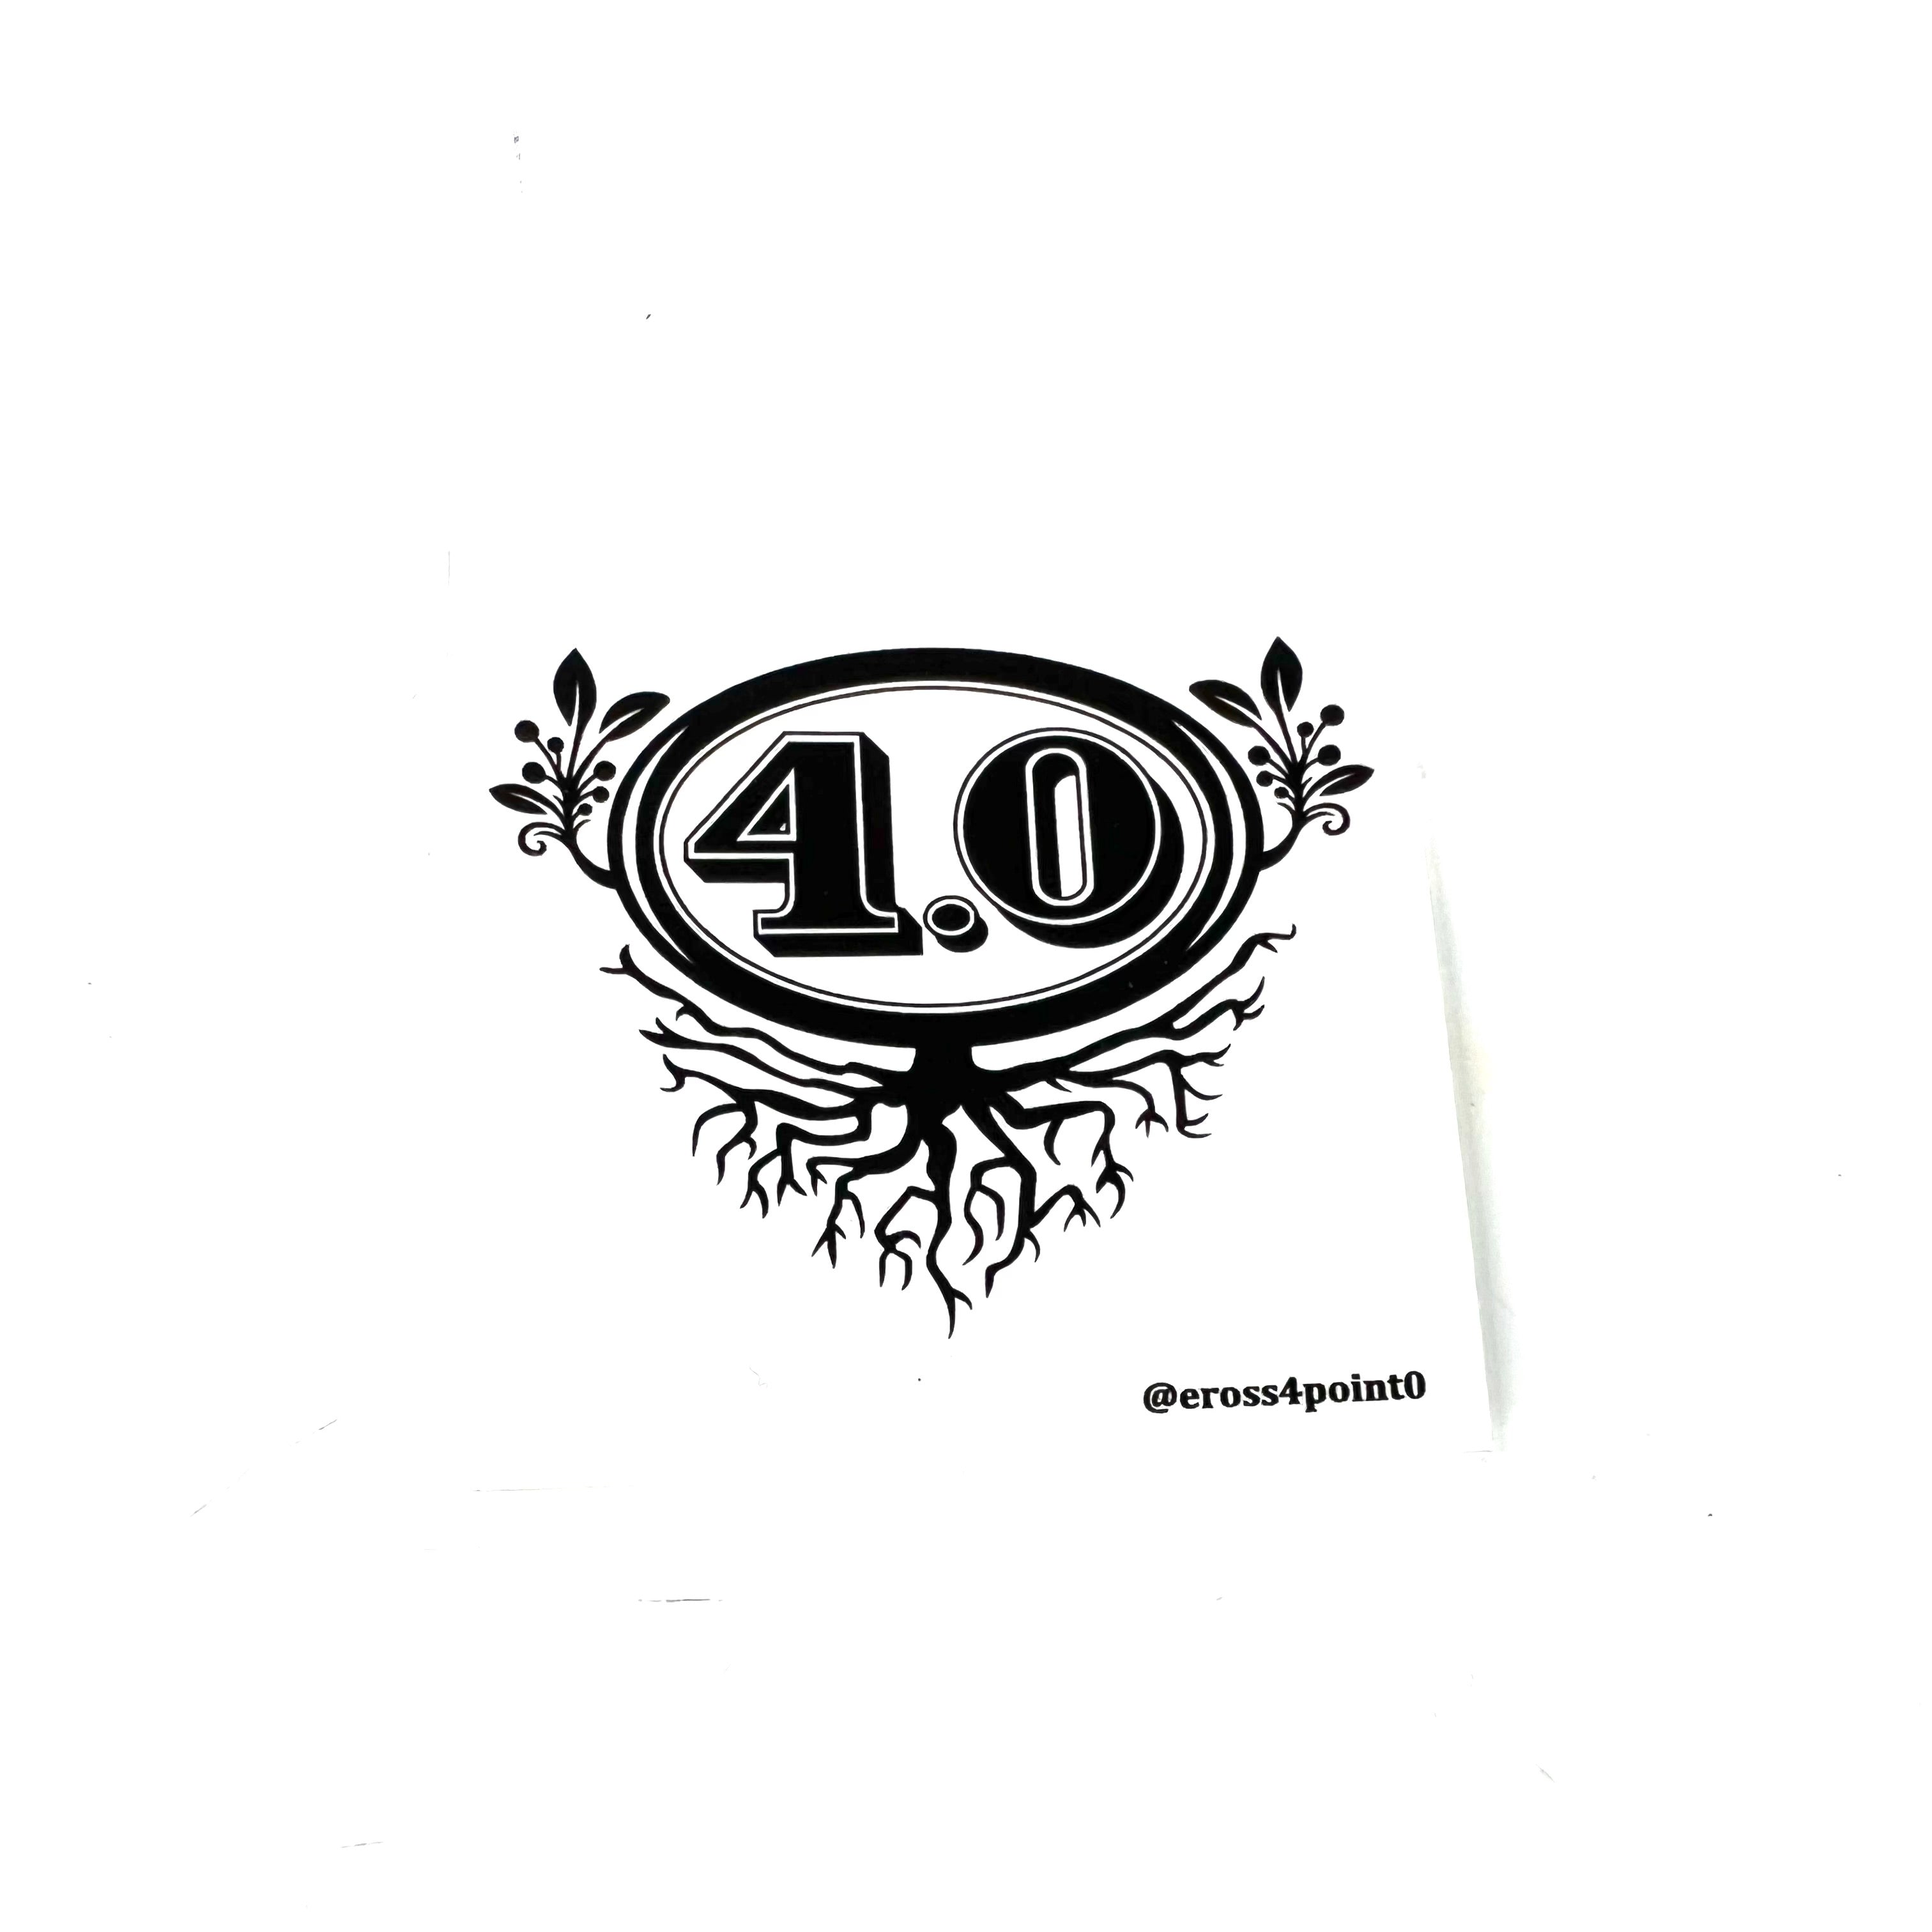 4.0 (Eric Ross) 2023 Stickers